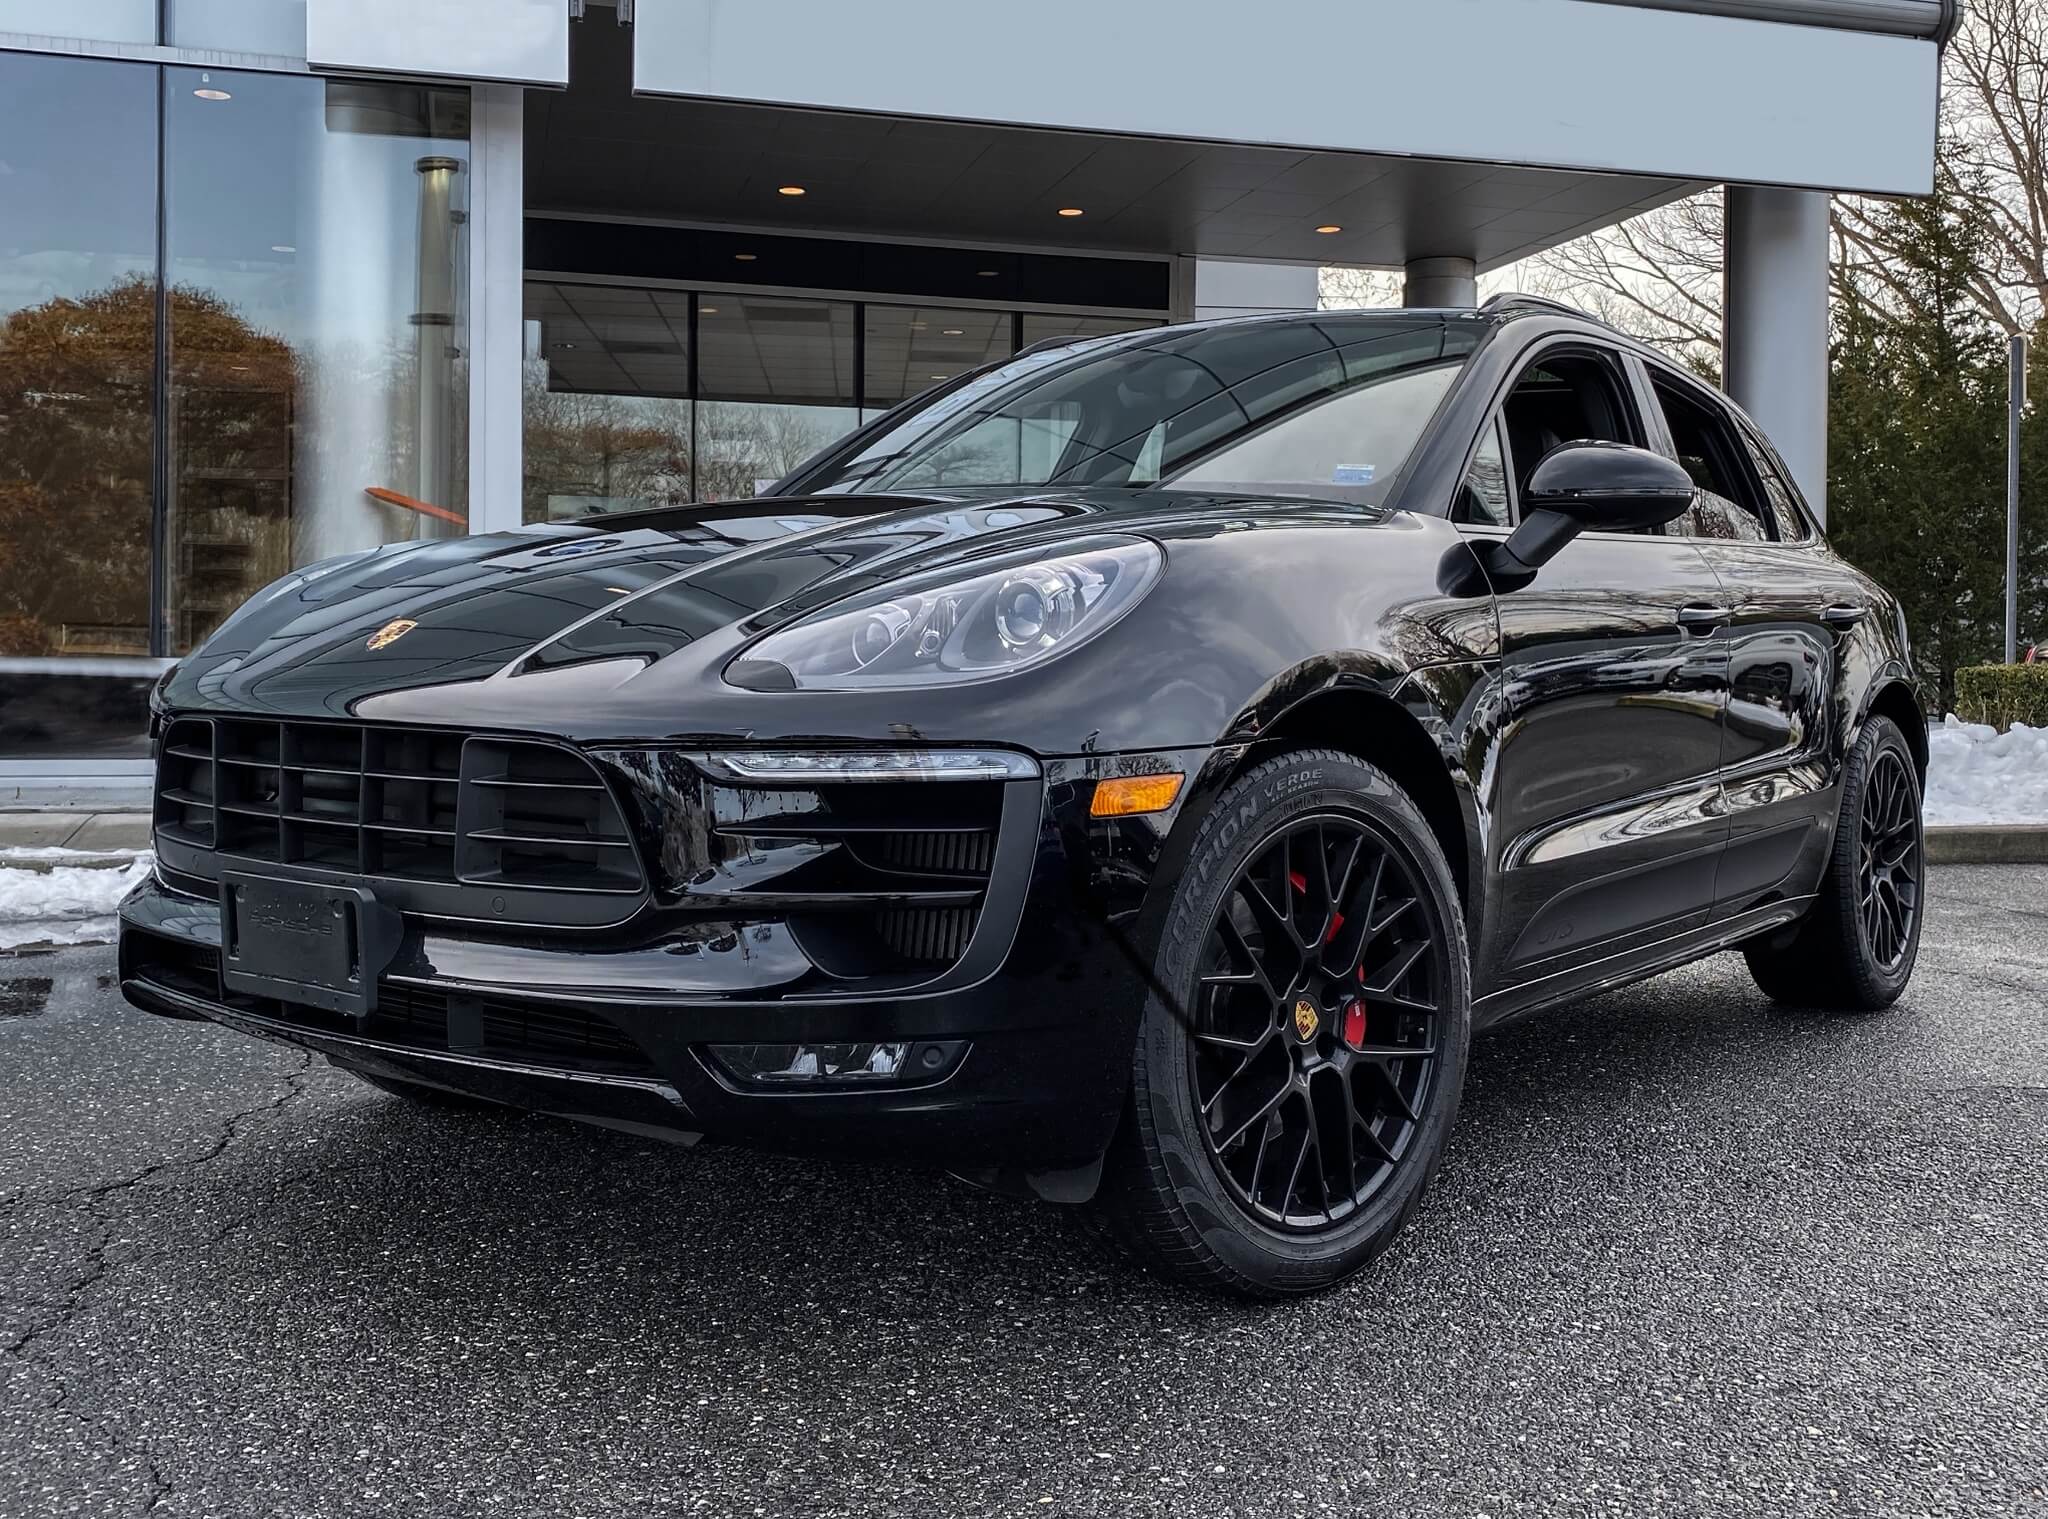 Discover 48+ images porsche macan gts black - In.thptnganamst.edu.vn